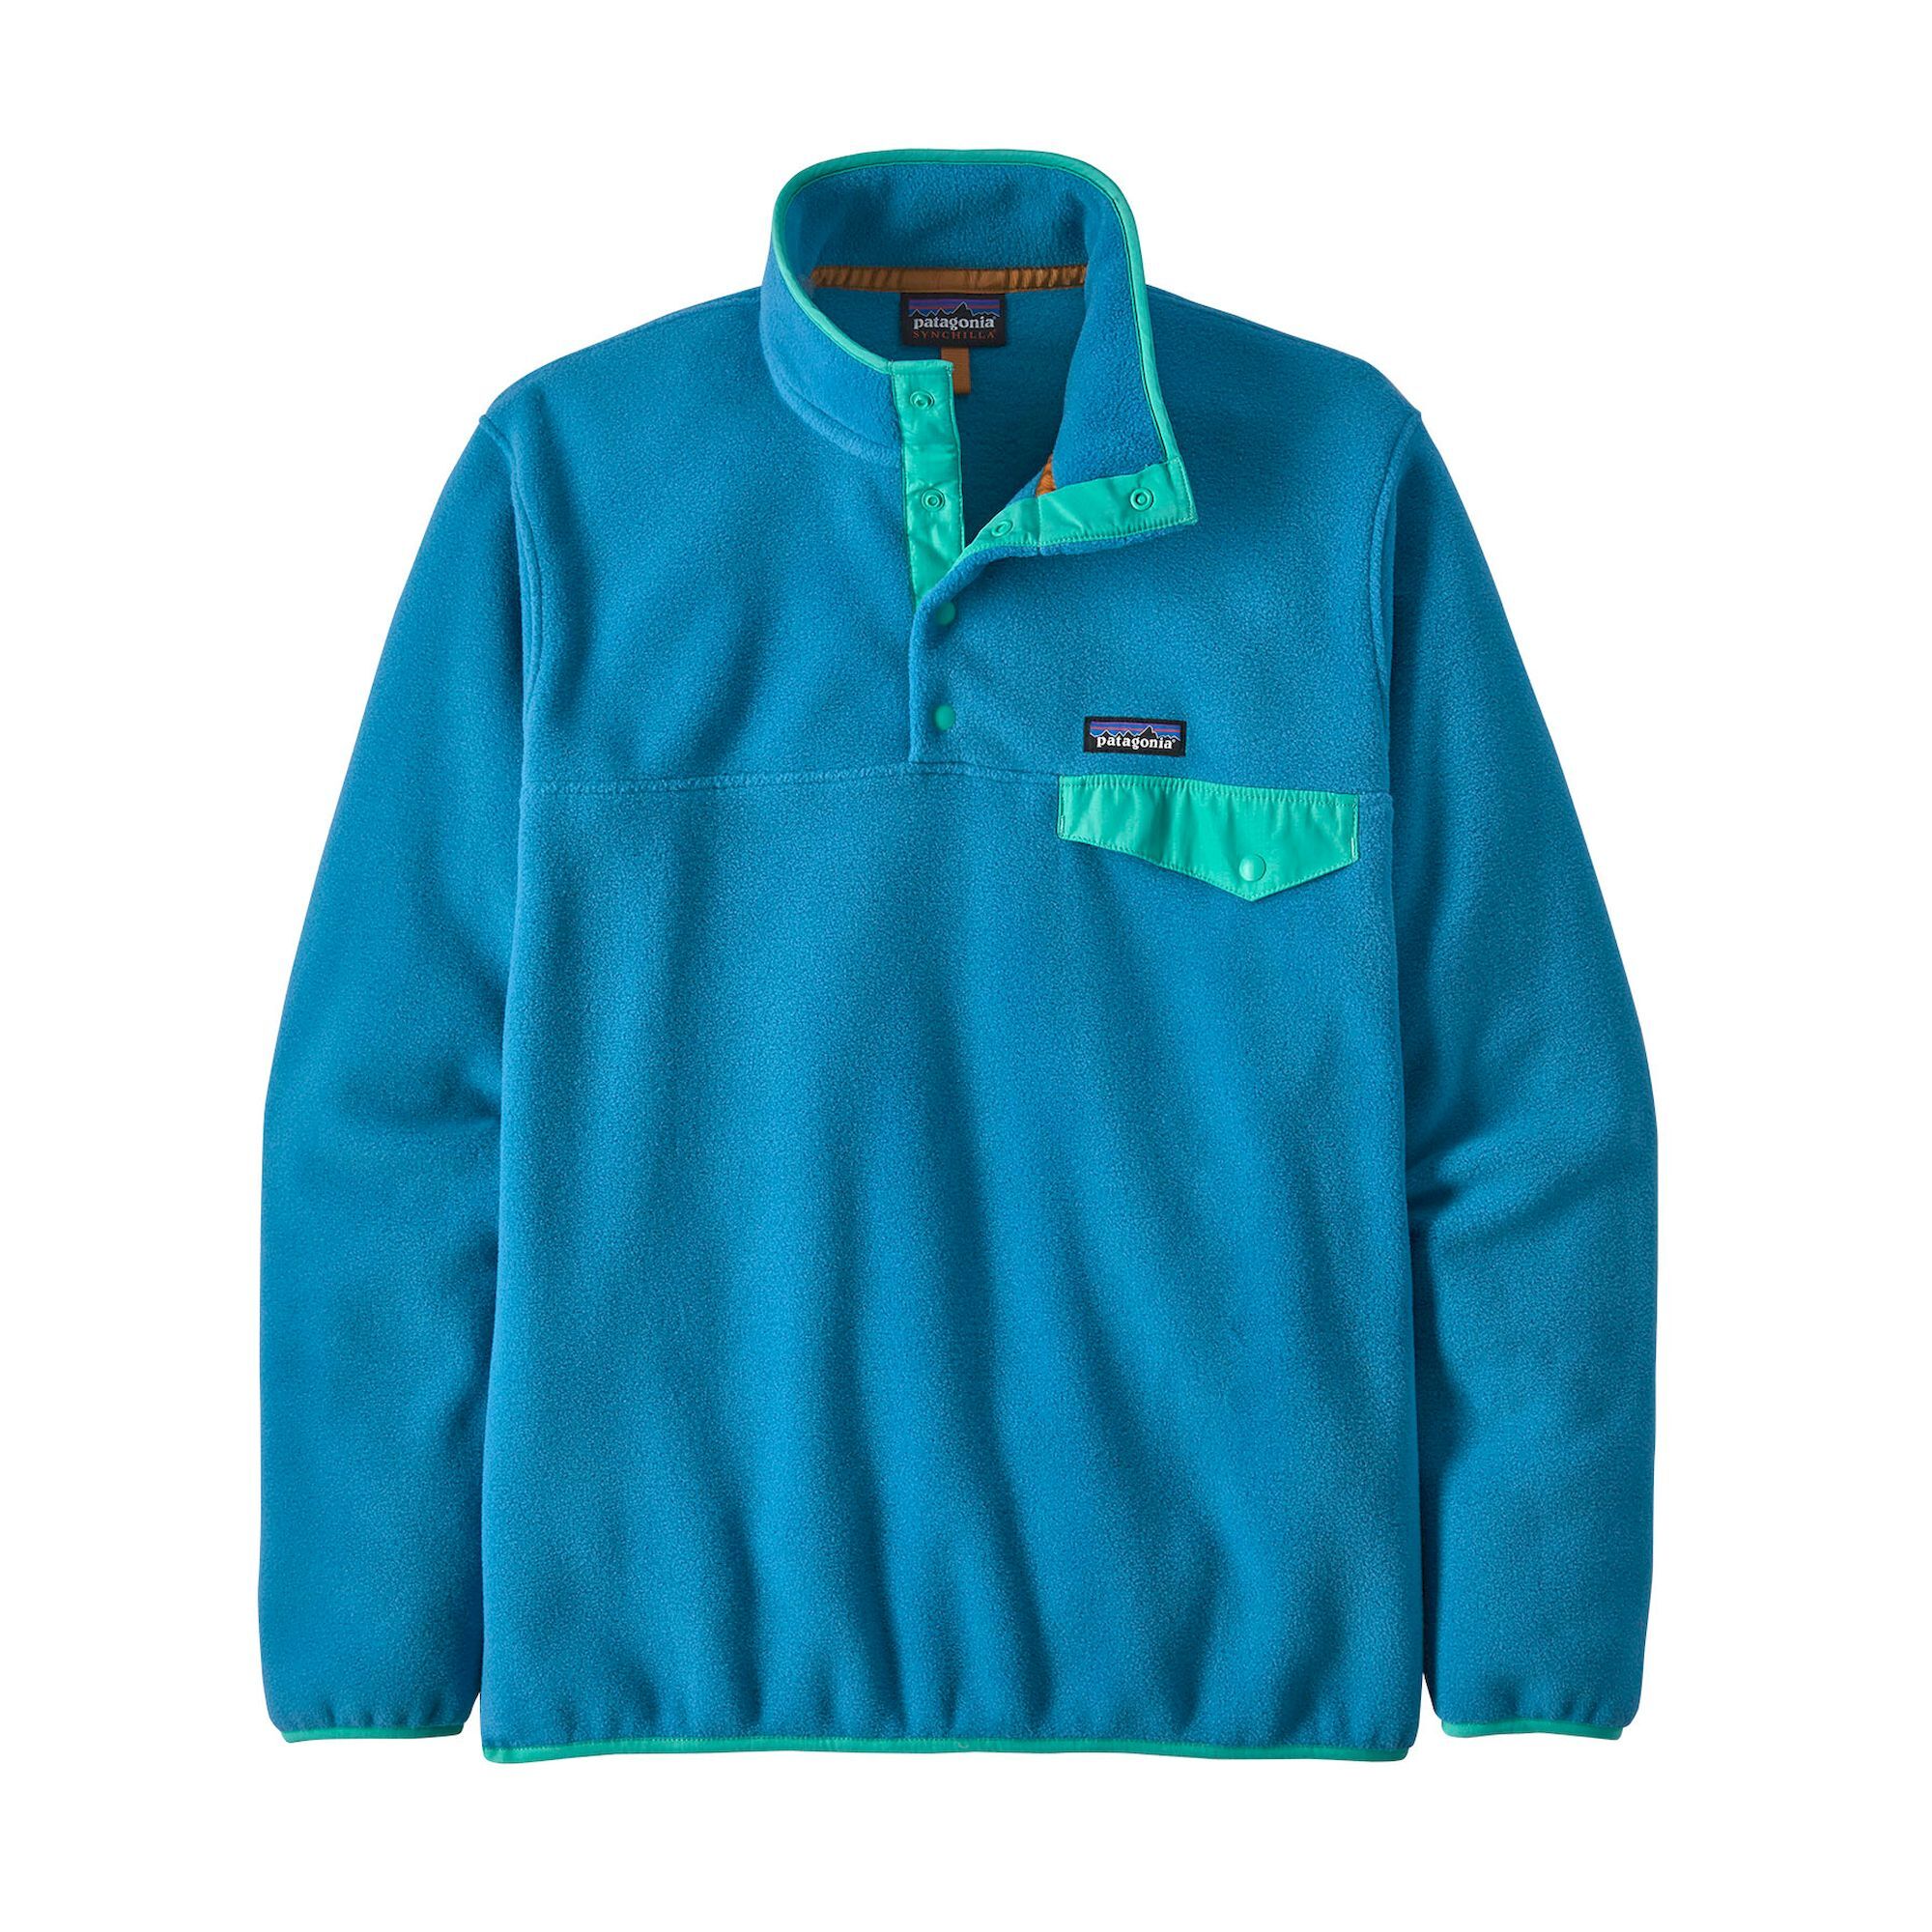 Patagonia - Lightweight Synchilla Snap-T® Pullover - EU Fit - Men's